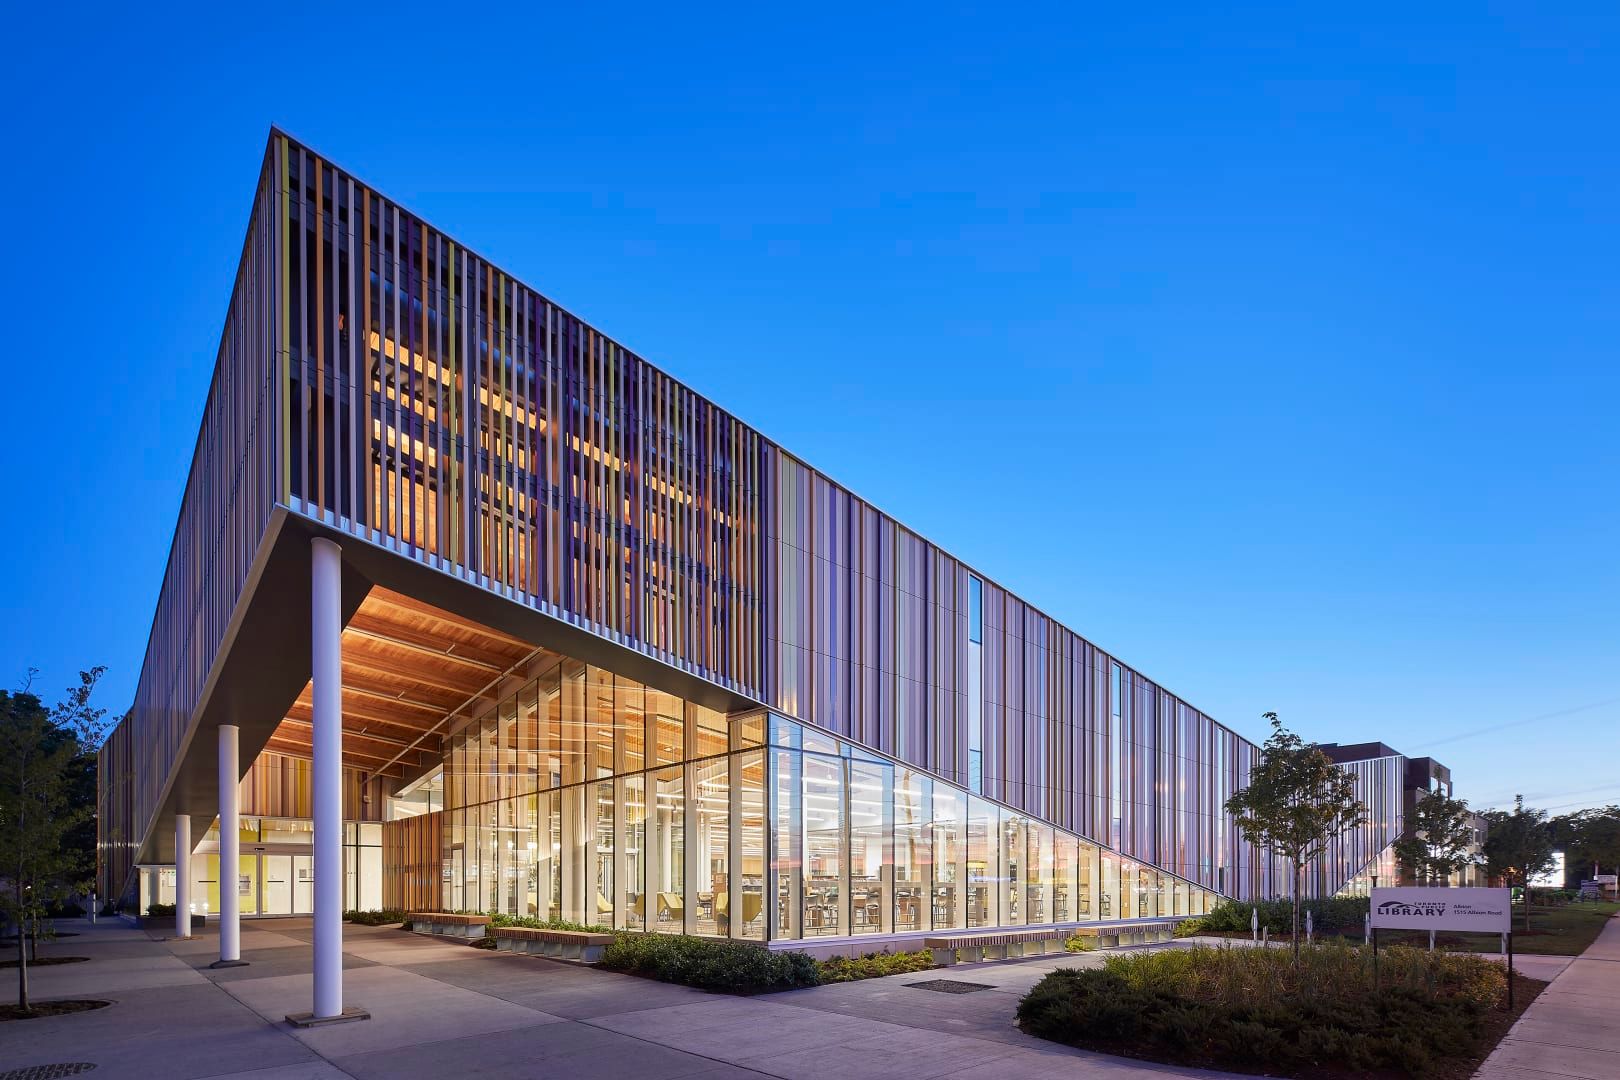 Albion district library by Perkins + WIll